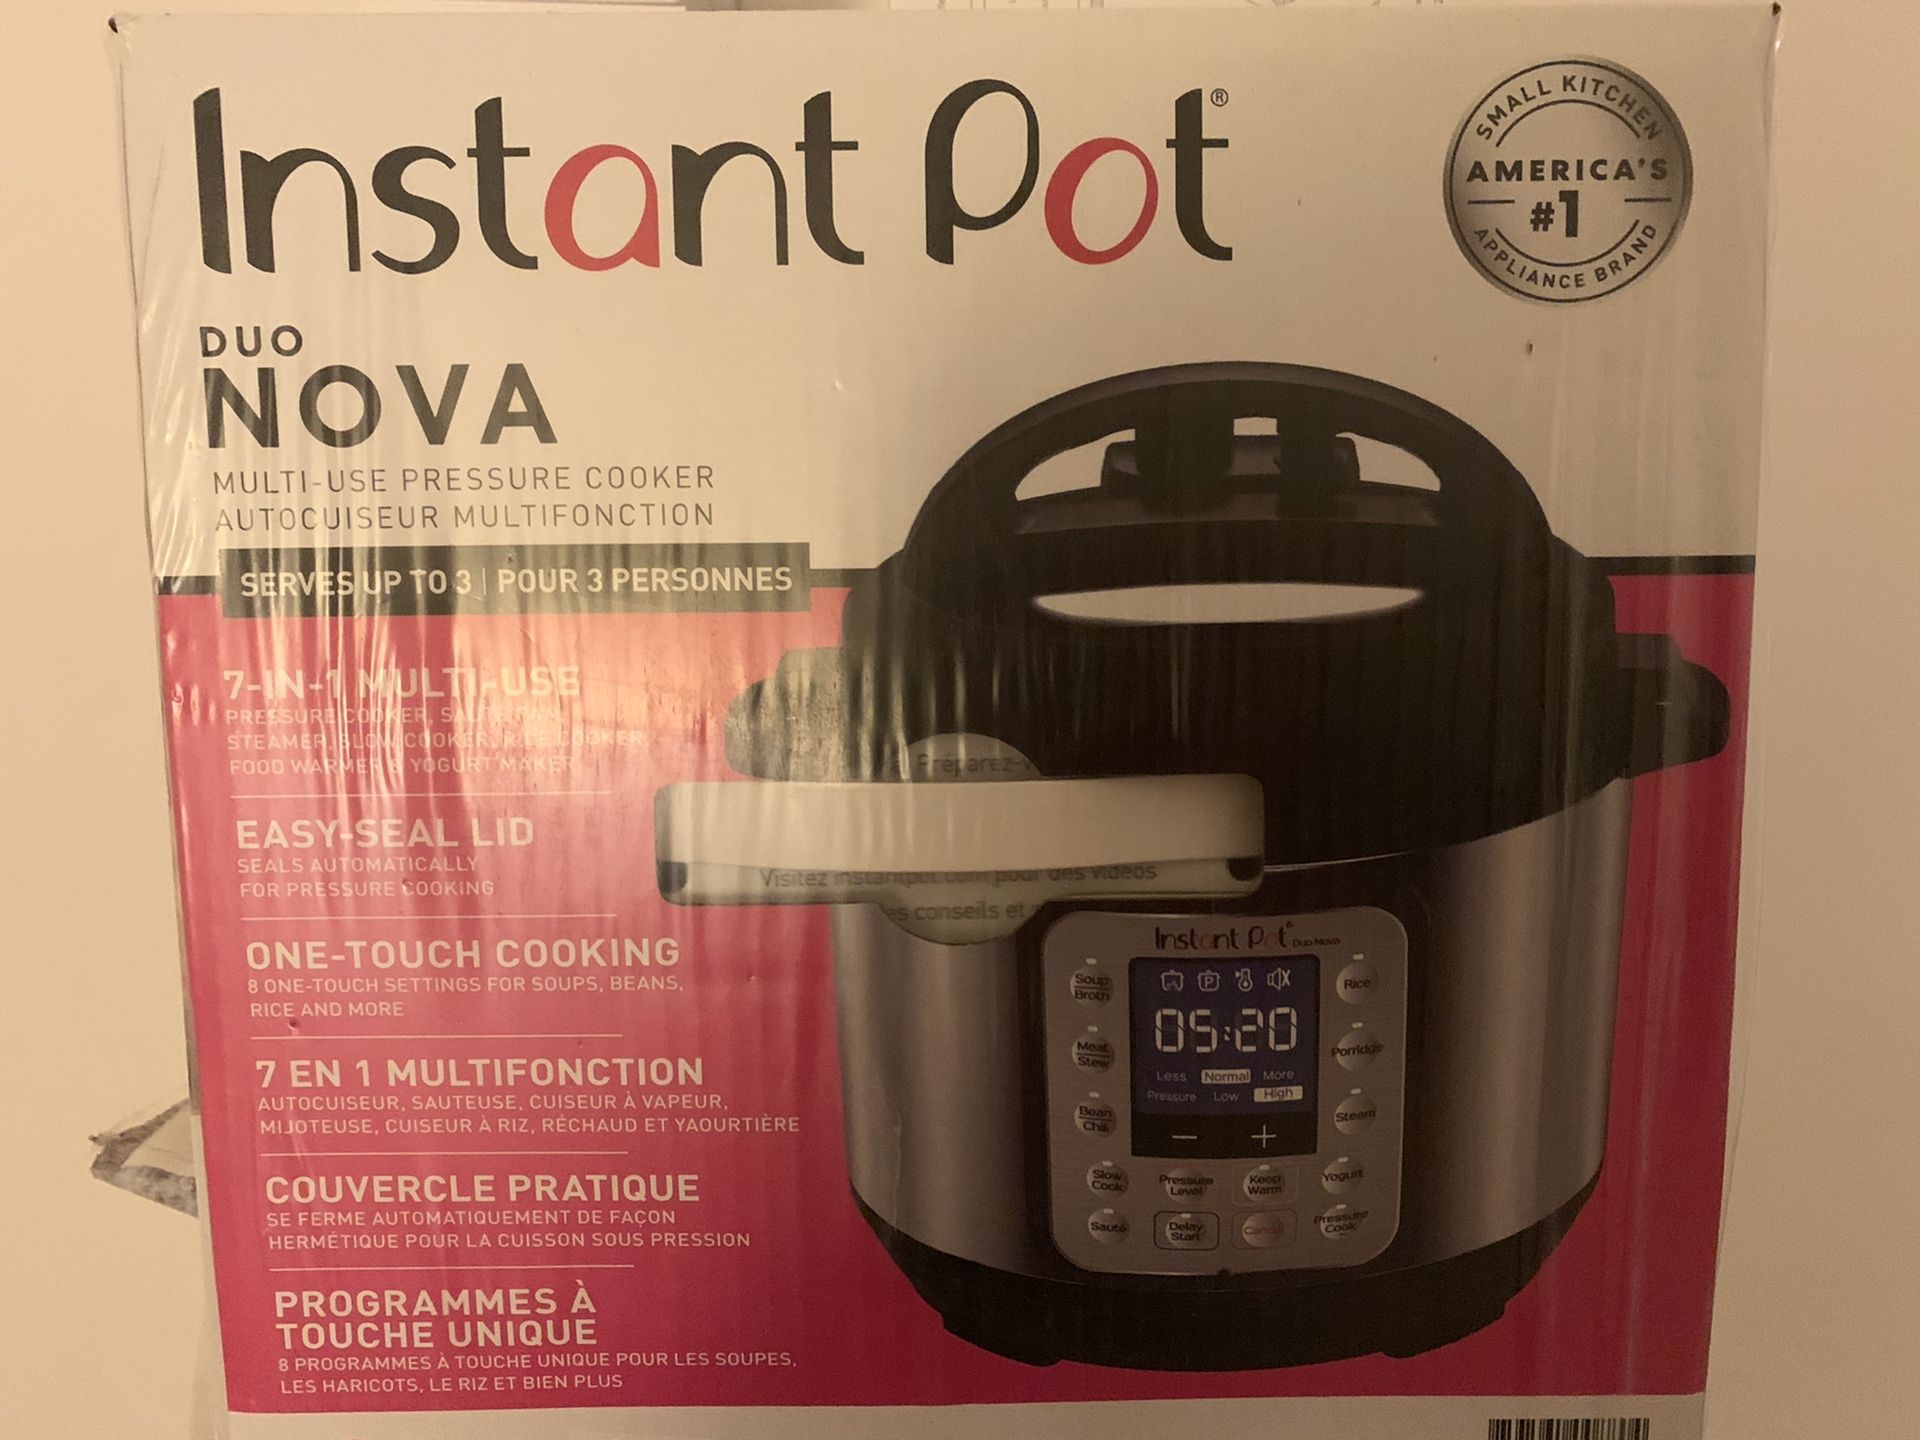 Sealed Brand new Instant Pot Duo Nova 7-in-1 Electric Pressure Cooker, Slow Cooker, Rice Cooker, Steamer, Saute, Yogurt Maker, and Warmer|3 Quart|Eas